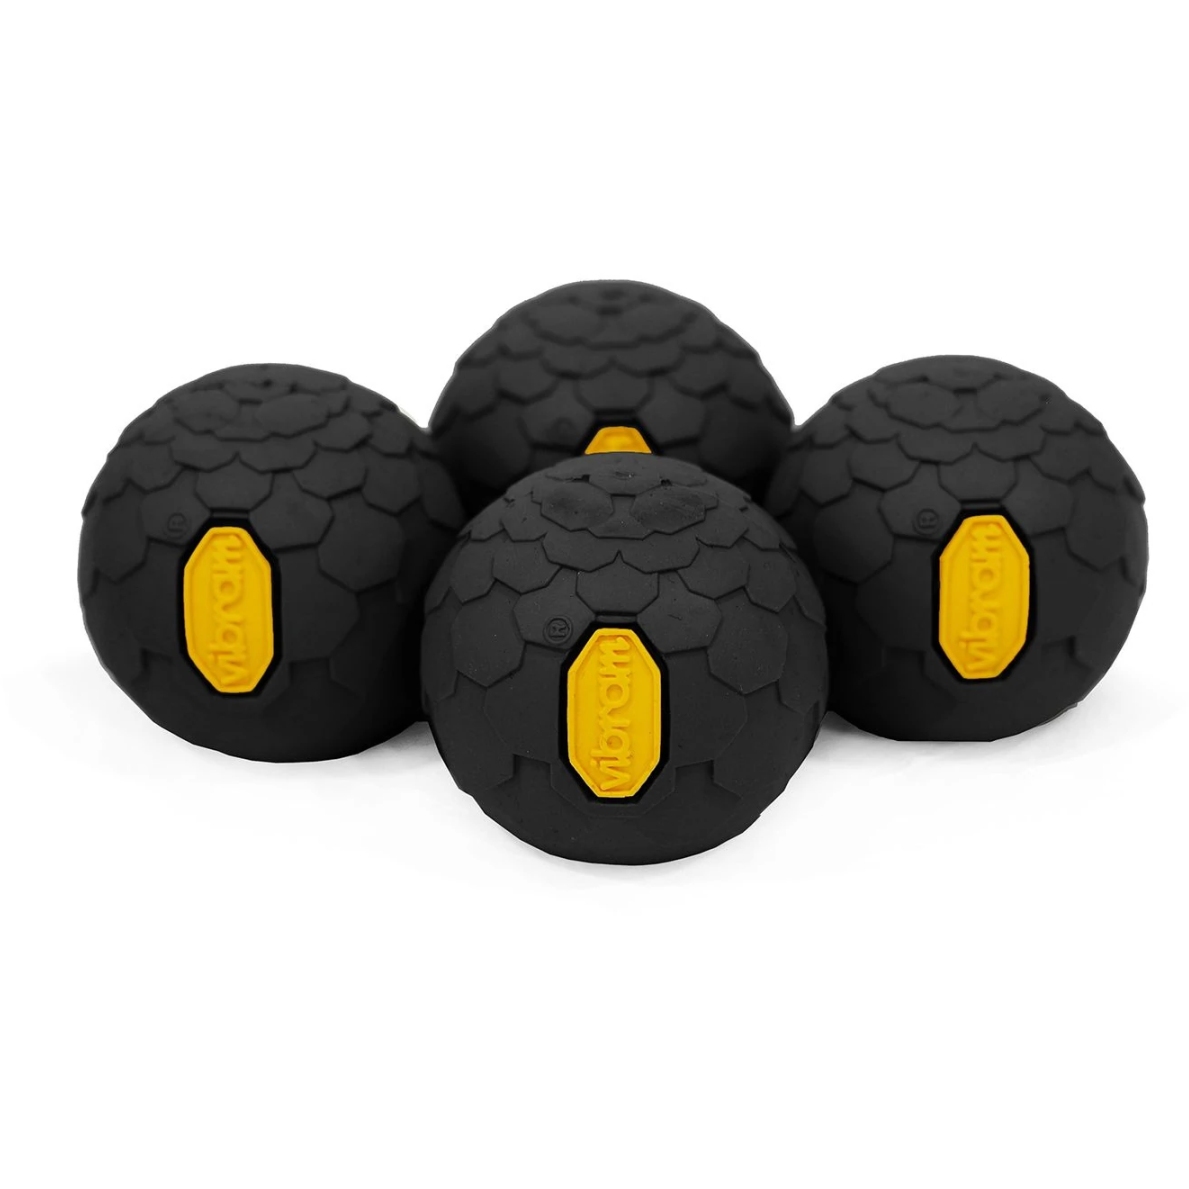 Picture of Helinox Vibram Ball Feet Set 45mm for Camping Chair - black - 4 pcs.